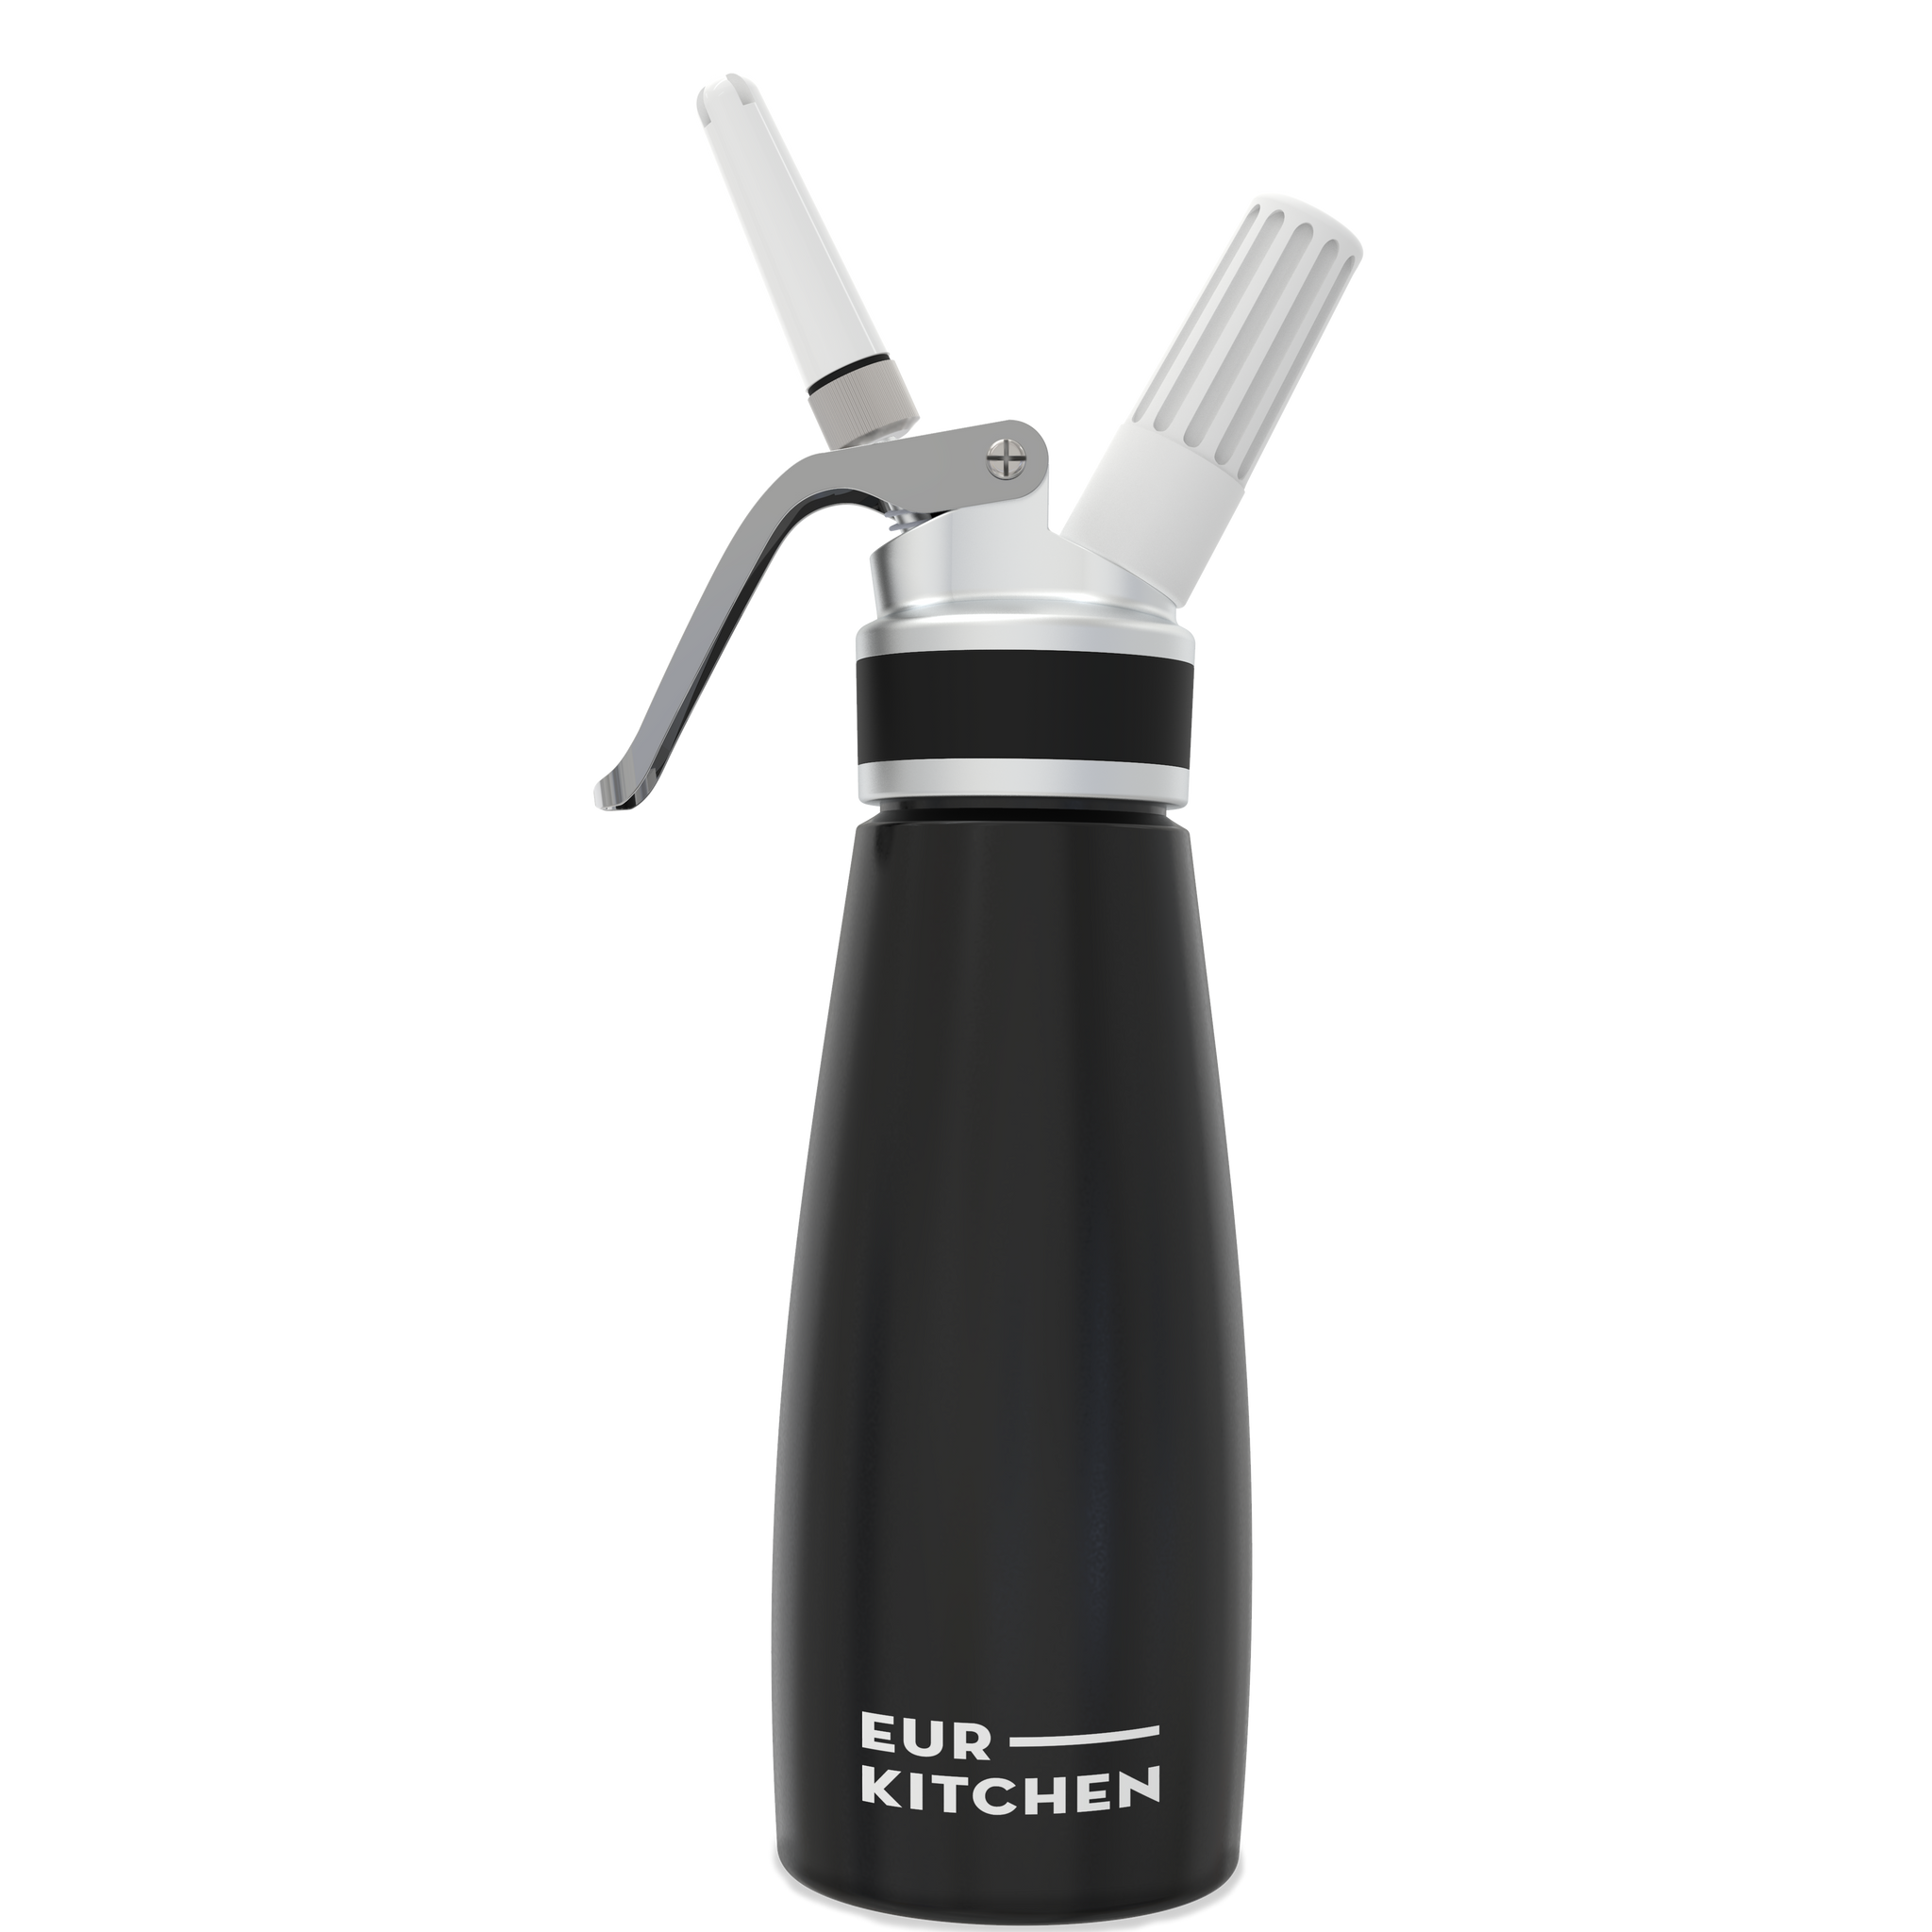 https://www.momjunction.com/wp-content/uploads/product-images/eurkitchen-professional-whipped-cream-dispenser_afl407.png